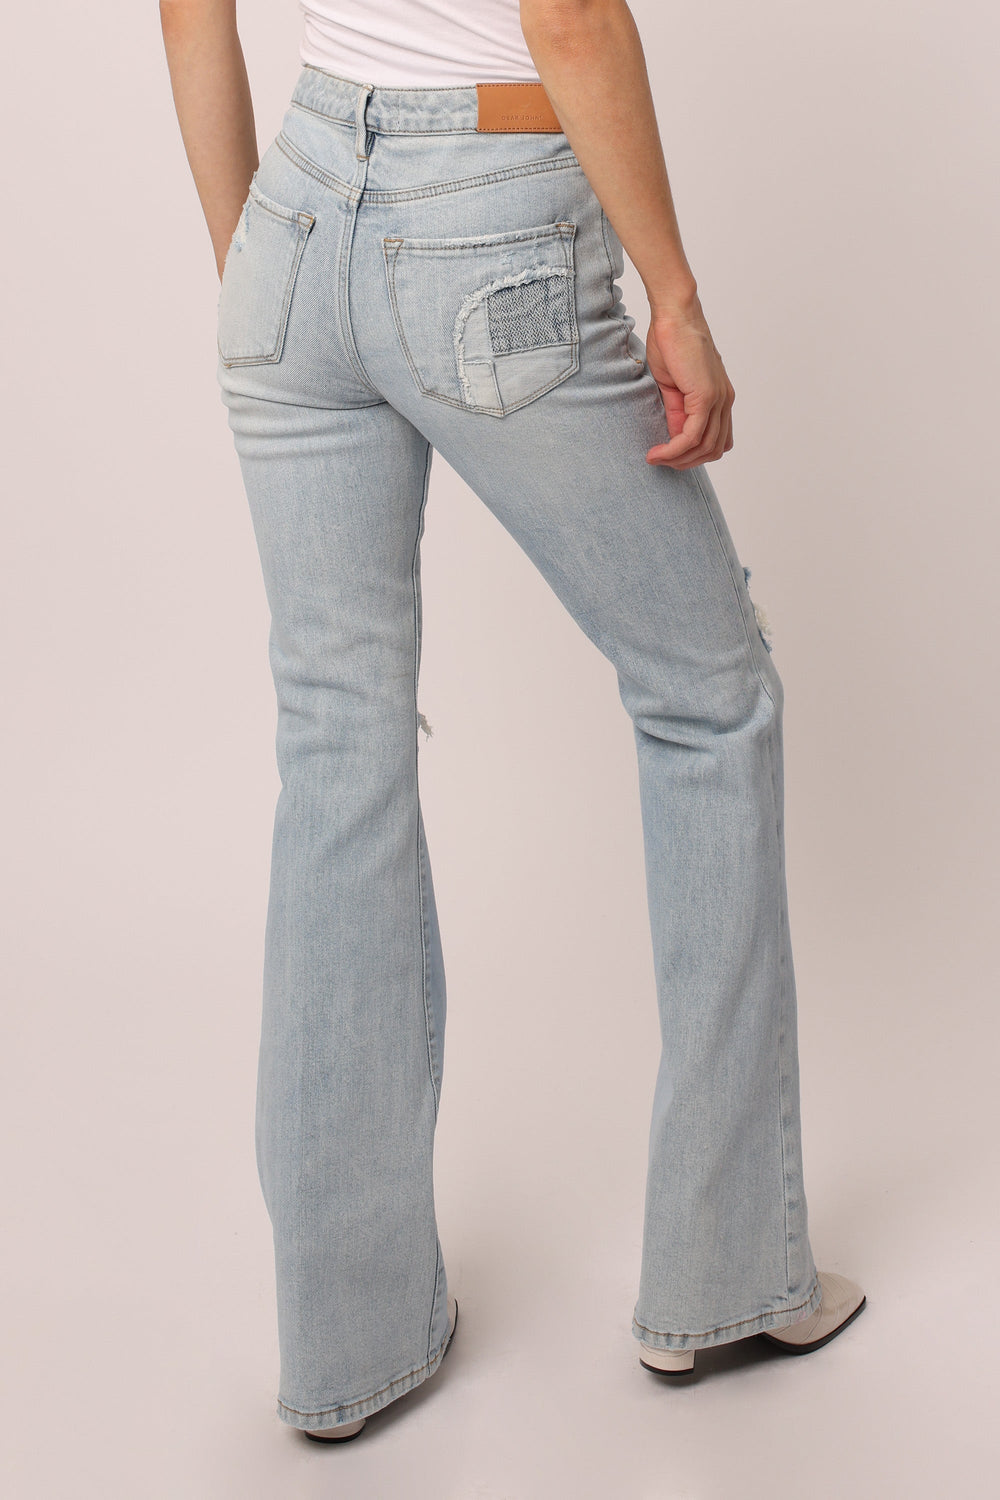 image of a female model wearing a LANEY HIGH RISE FLARE LEG JEANS WINDMILL JEANS